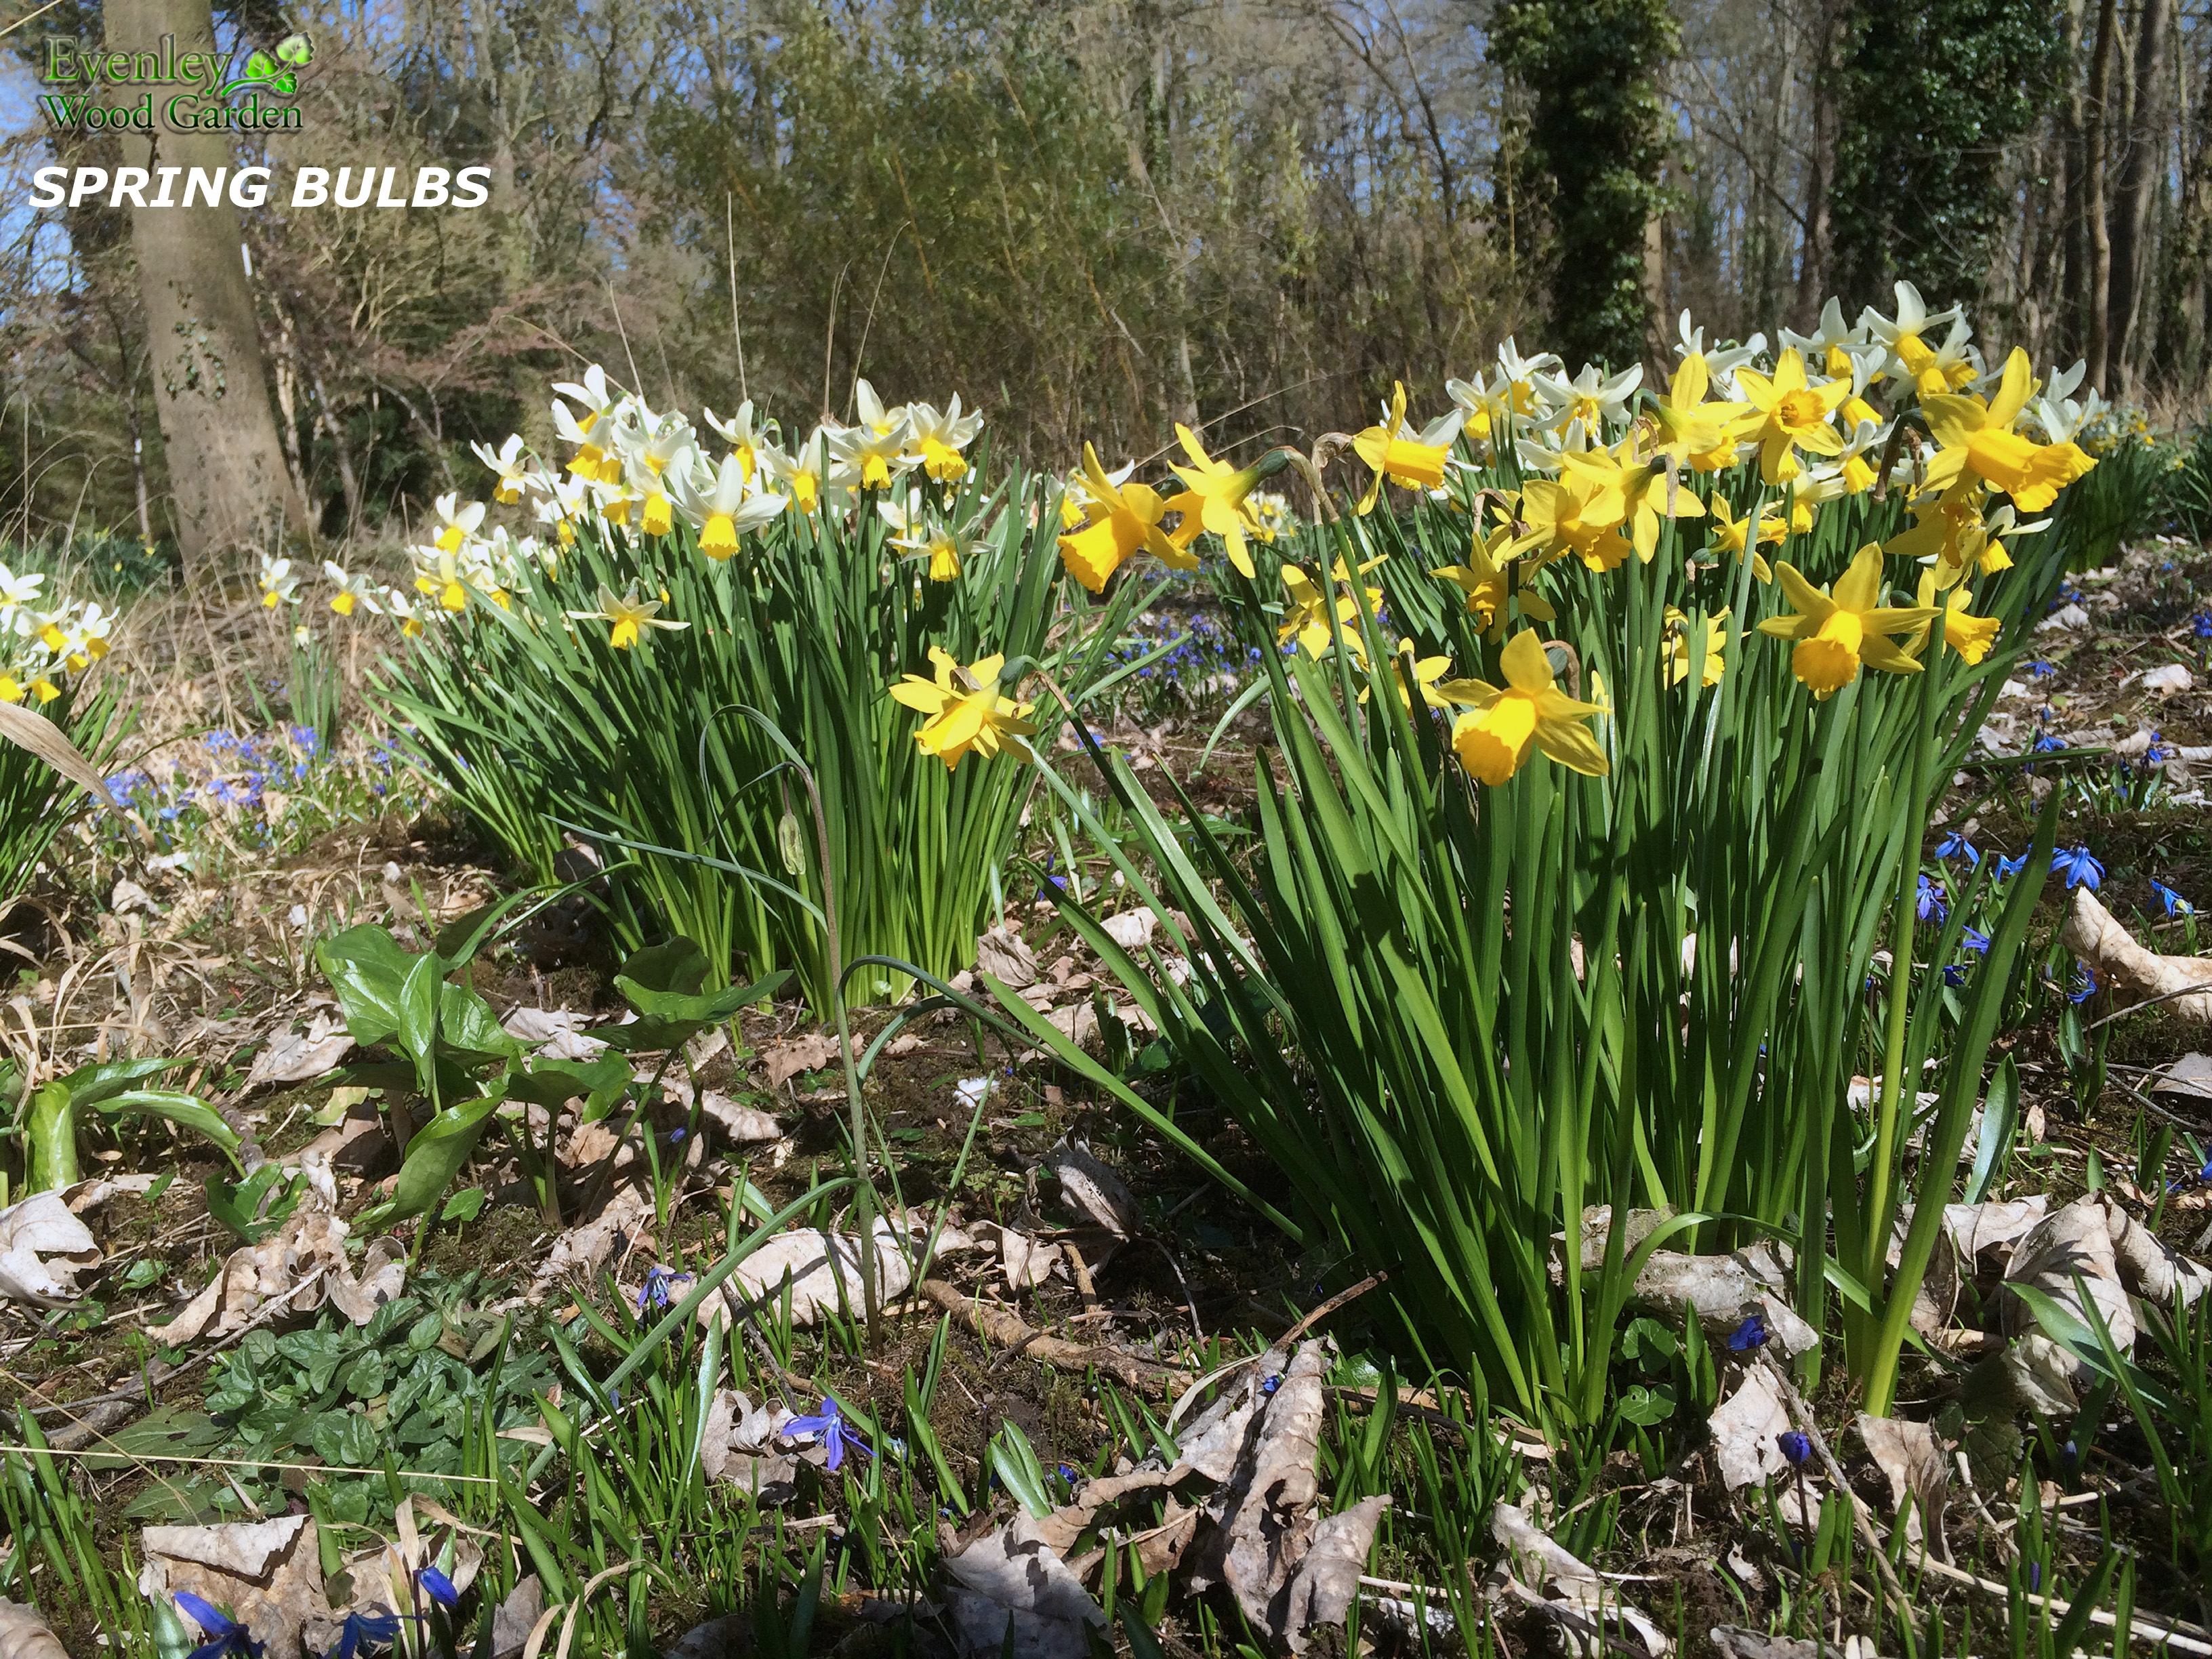 Daffodils in Stream Garden look lovely on March-April. Evenley Wood ...